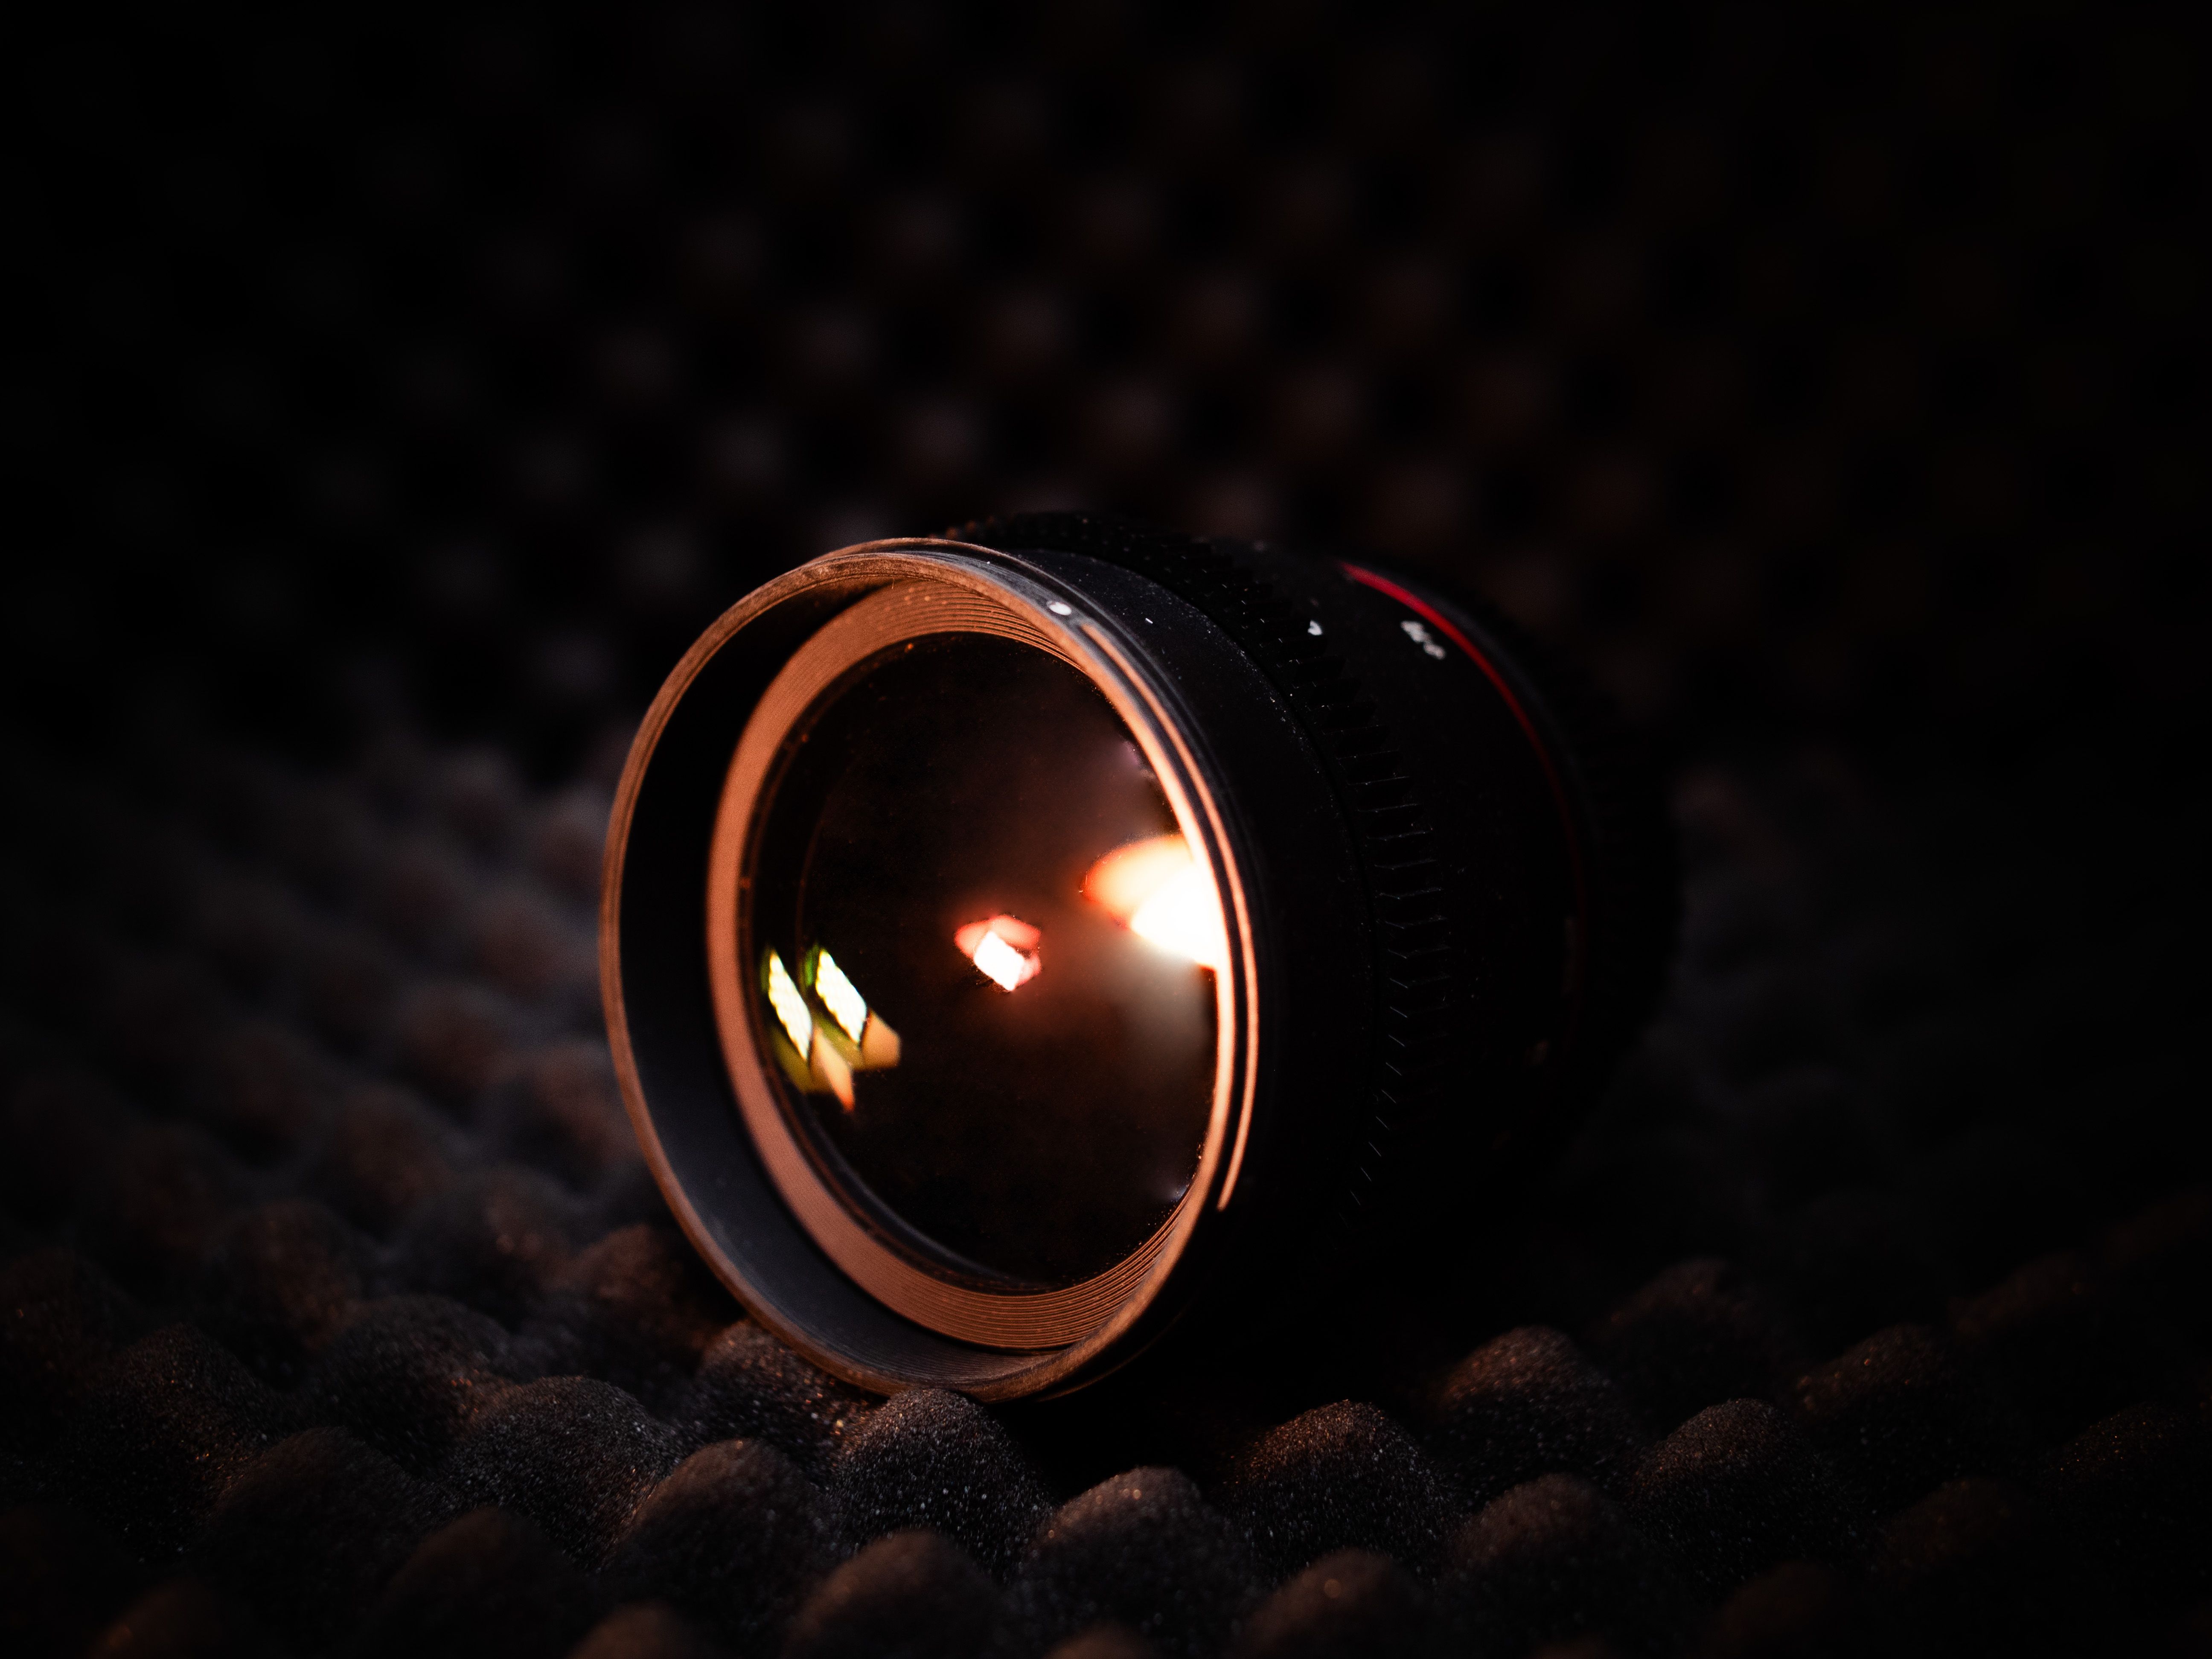 85 mm f.1.4 Walimax Pro Lens